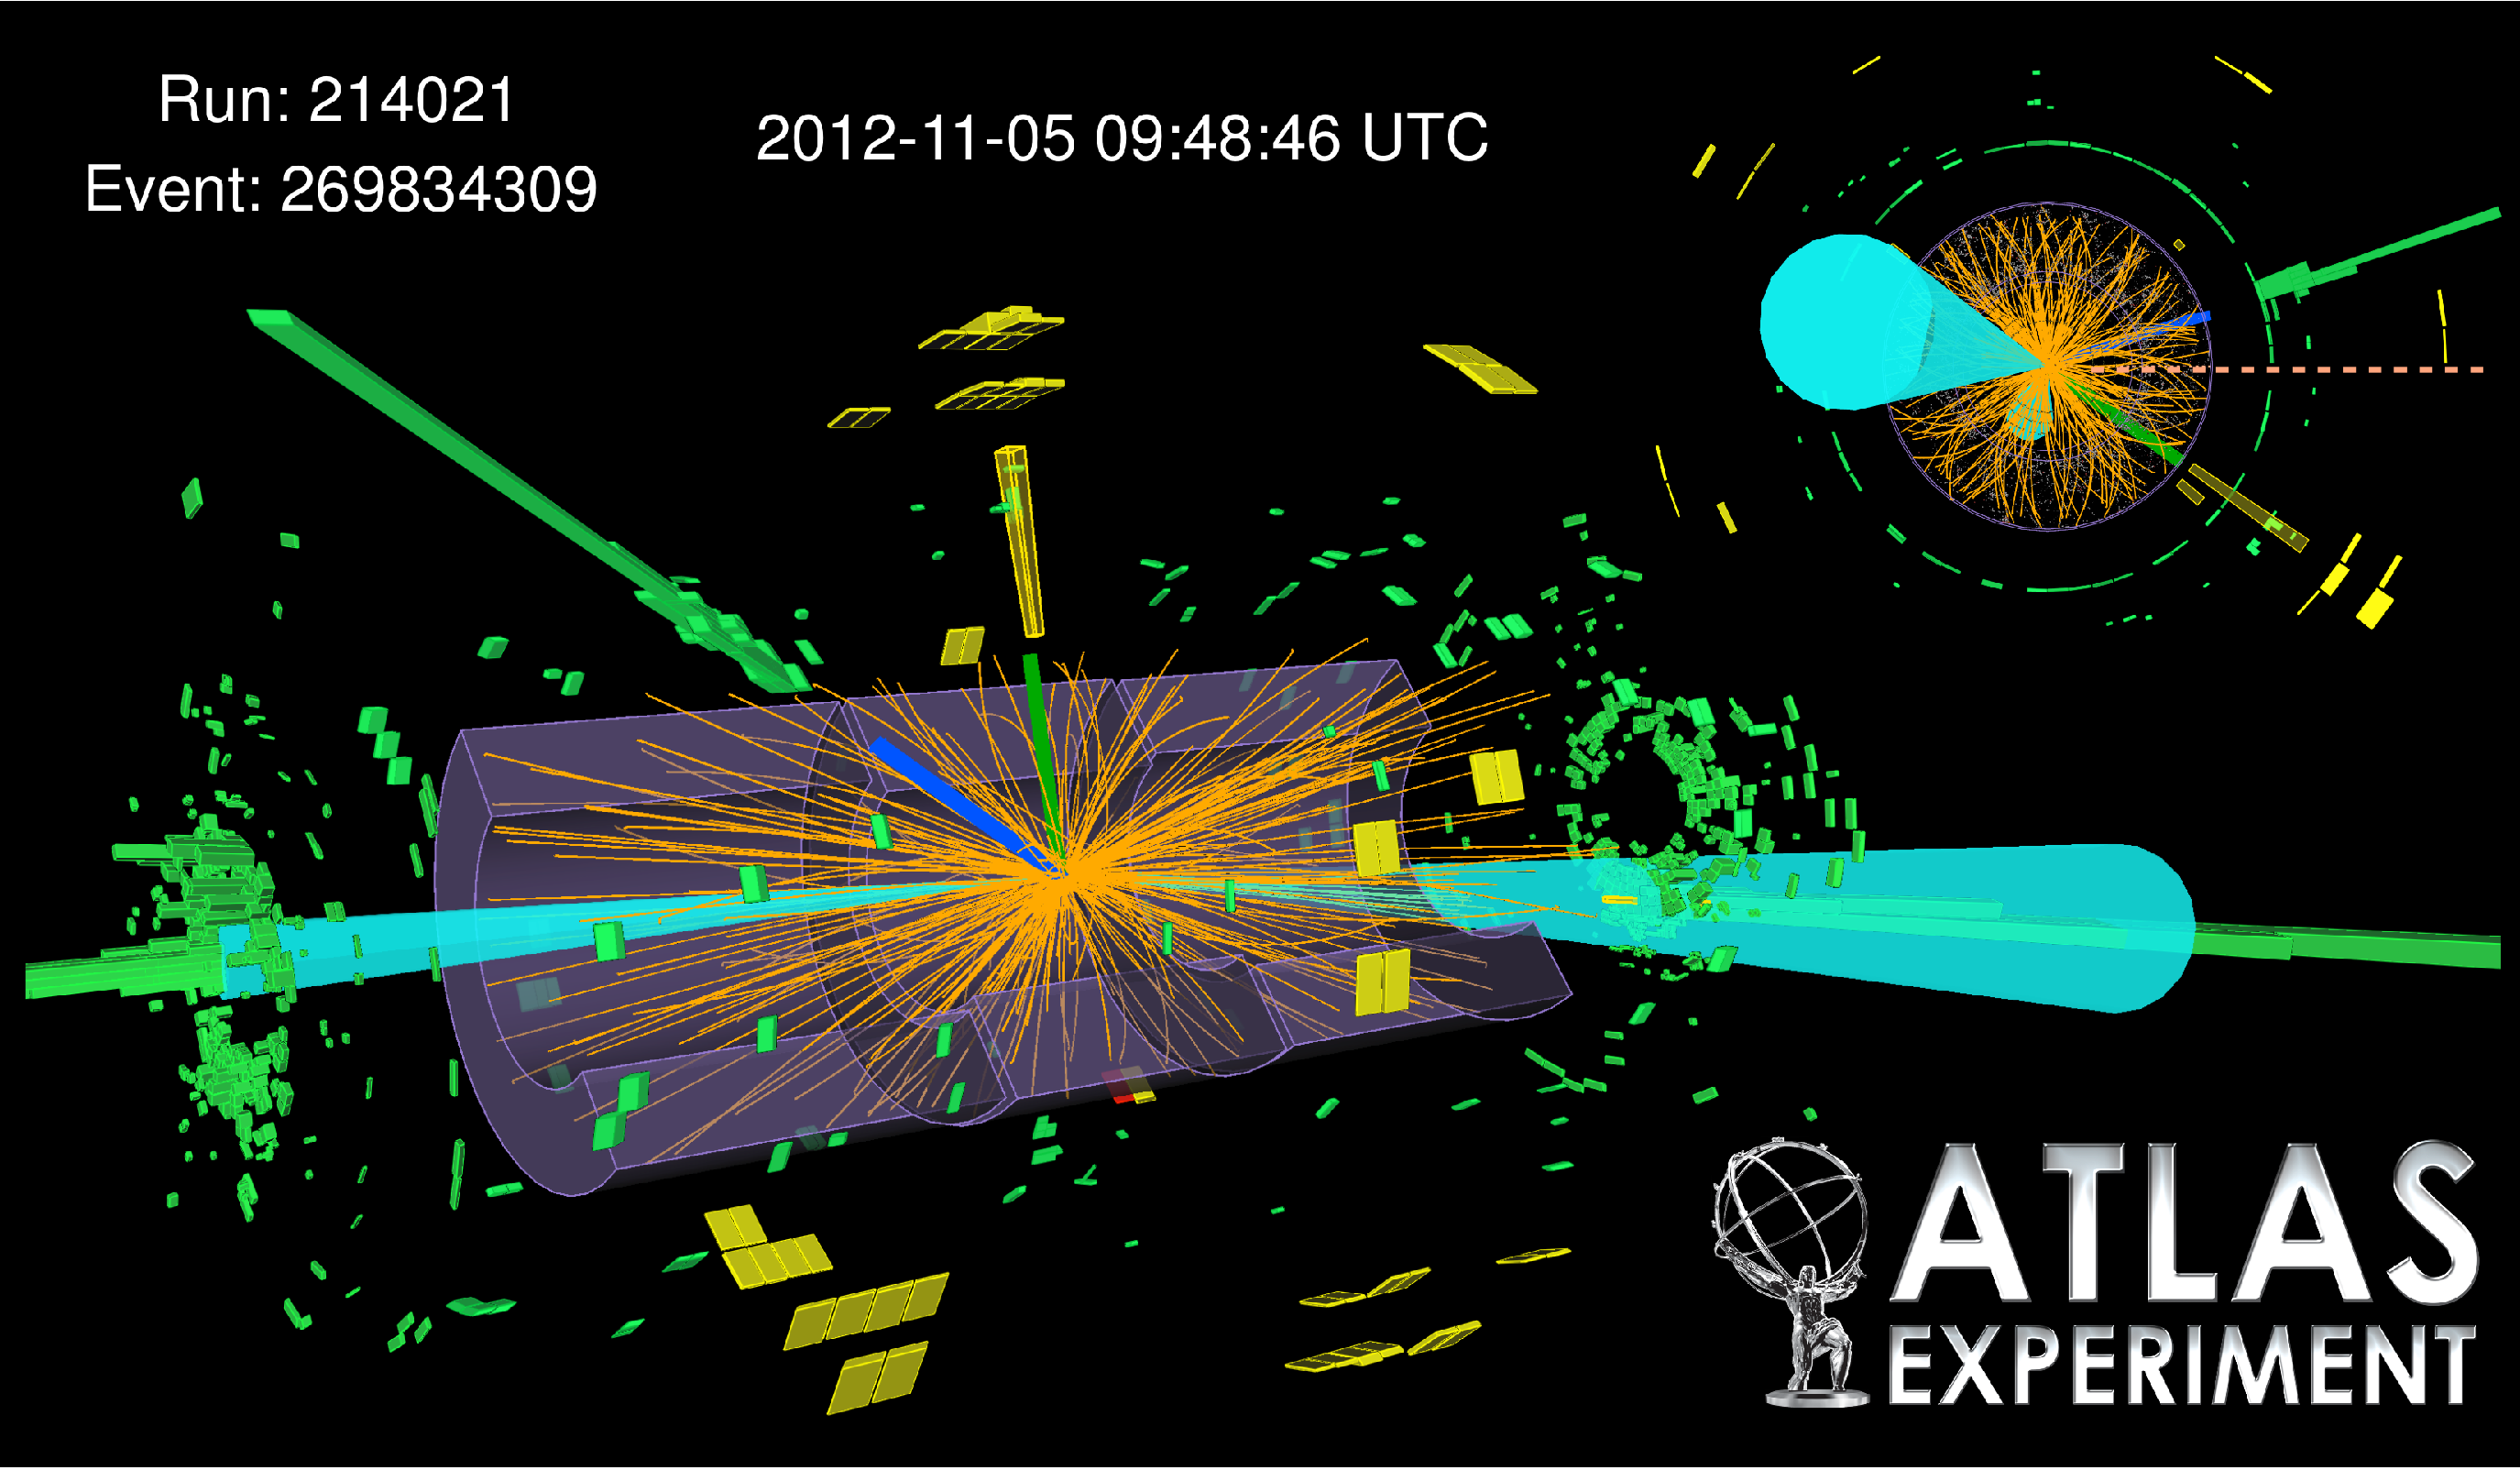 Display of a collision where a Higgs boson decaying into two tau leptons